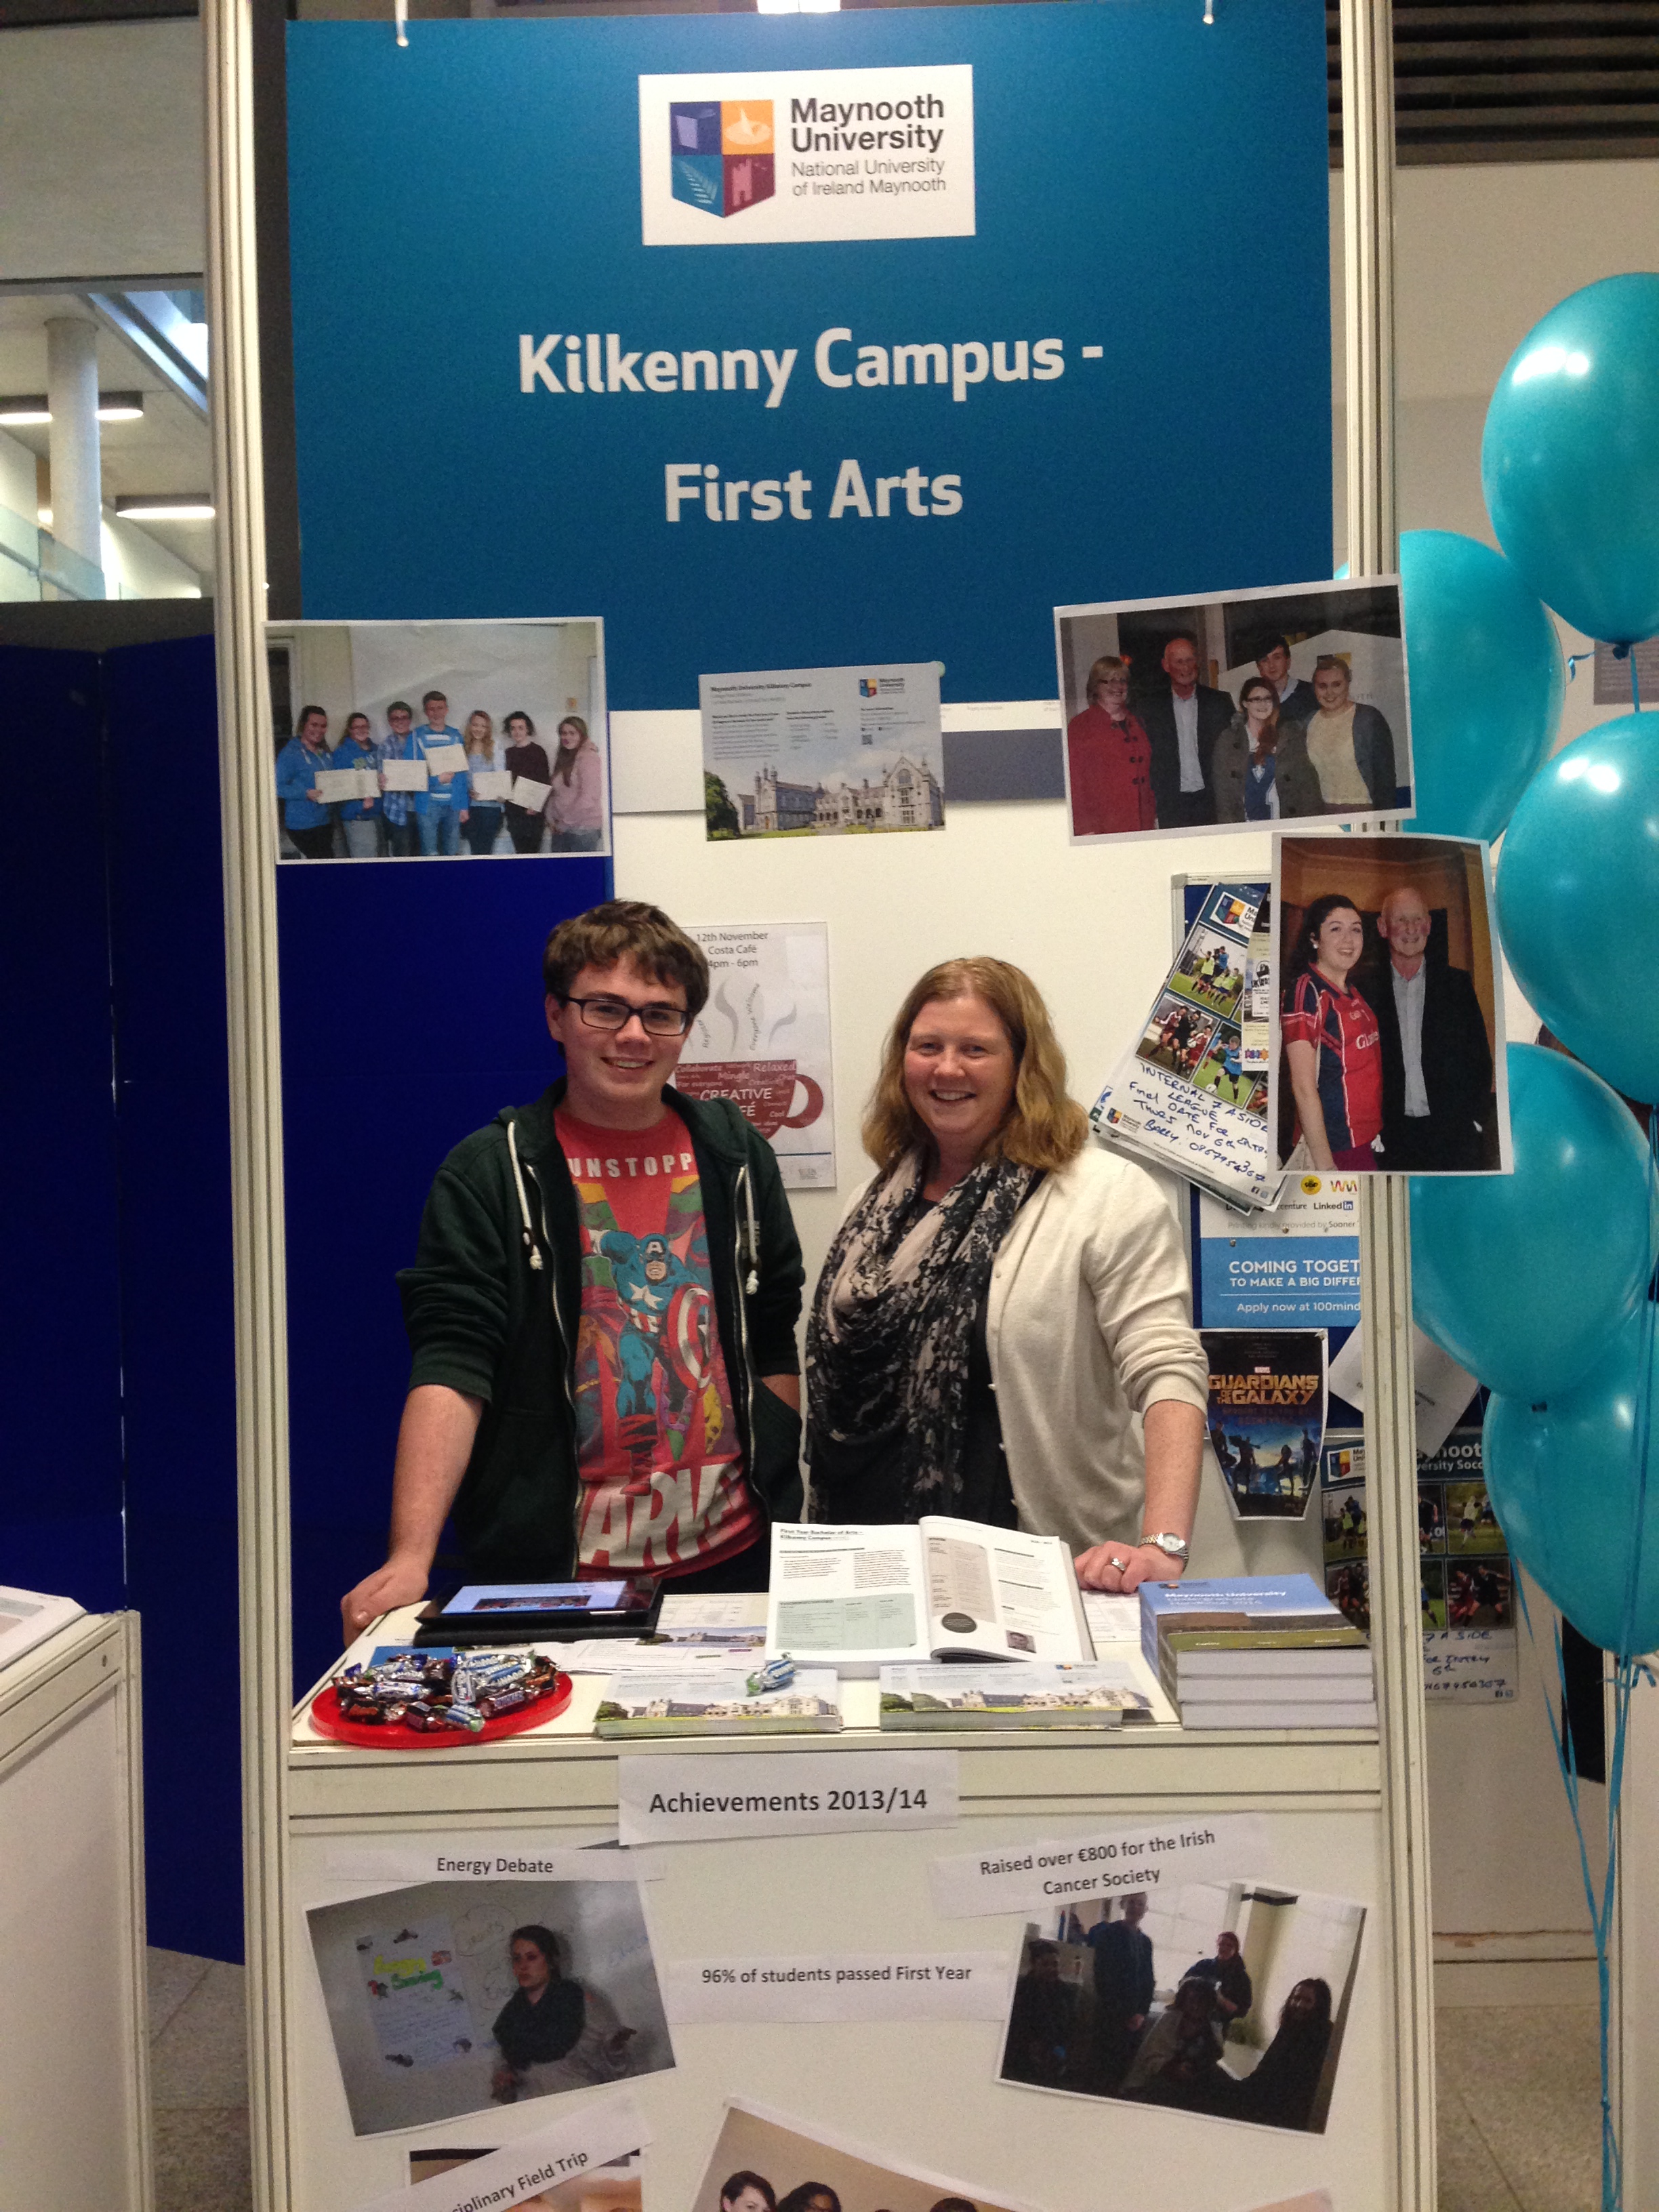 Representatives from our Kilkenny Campus First Arts programme